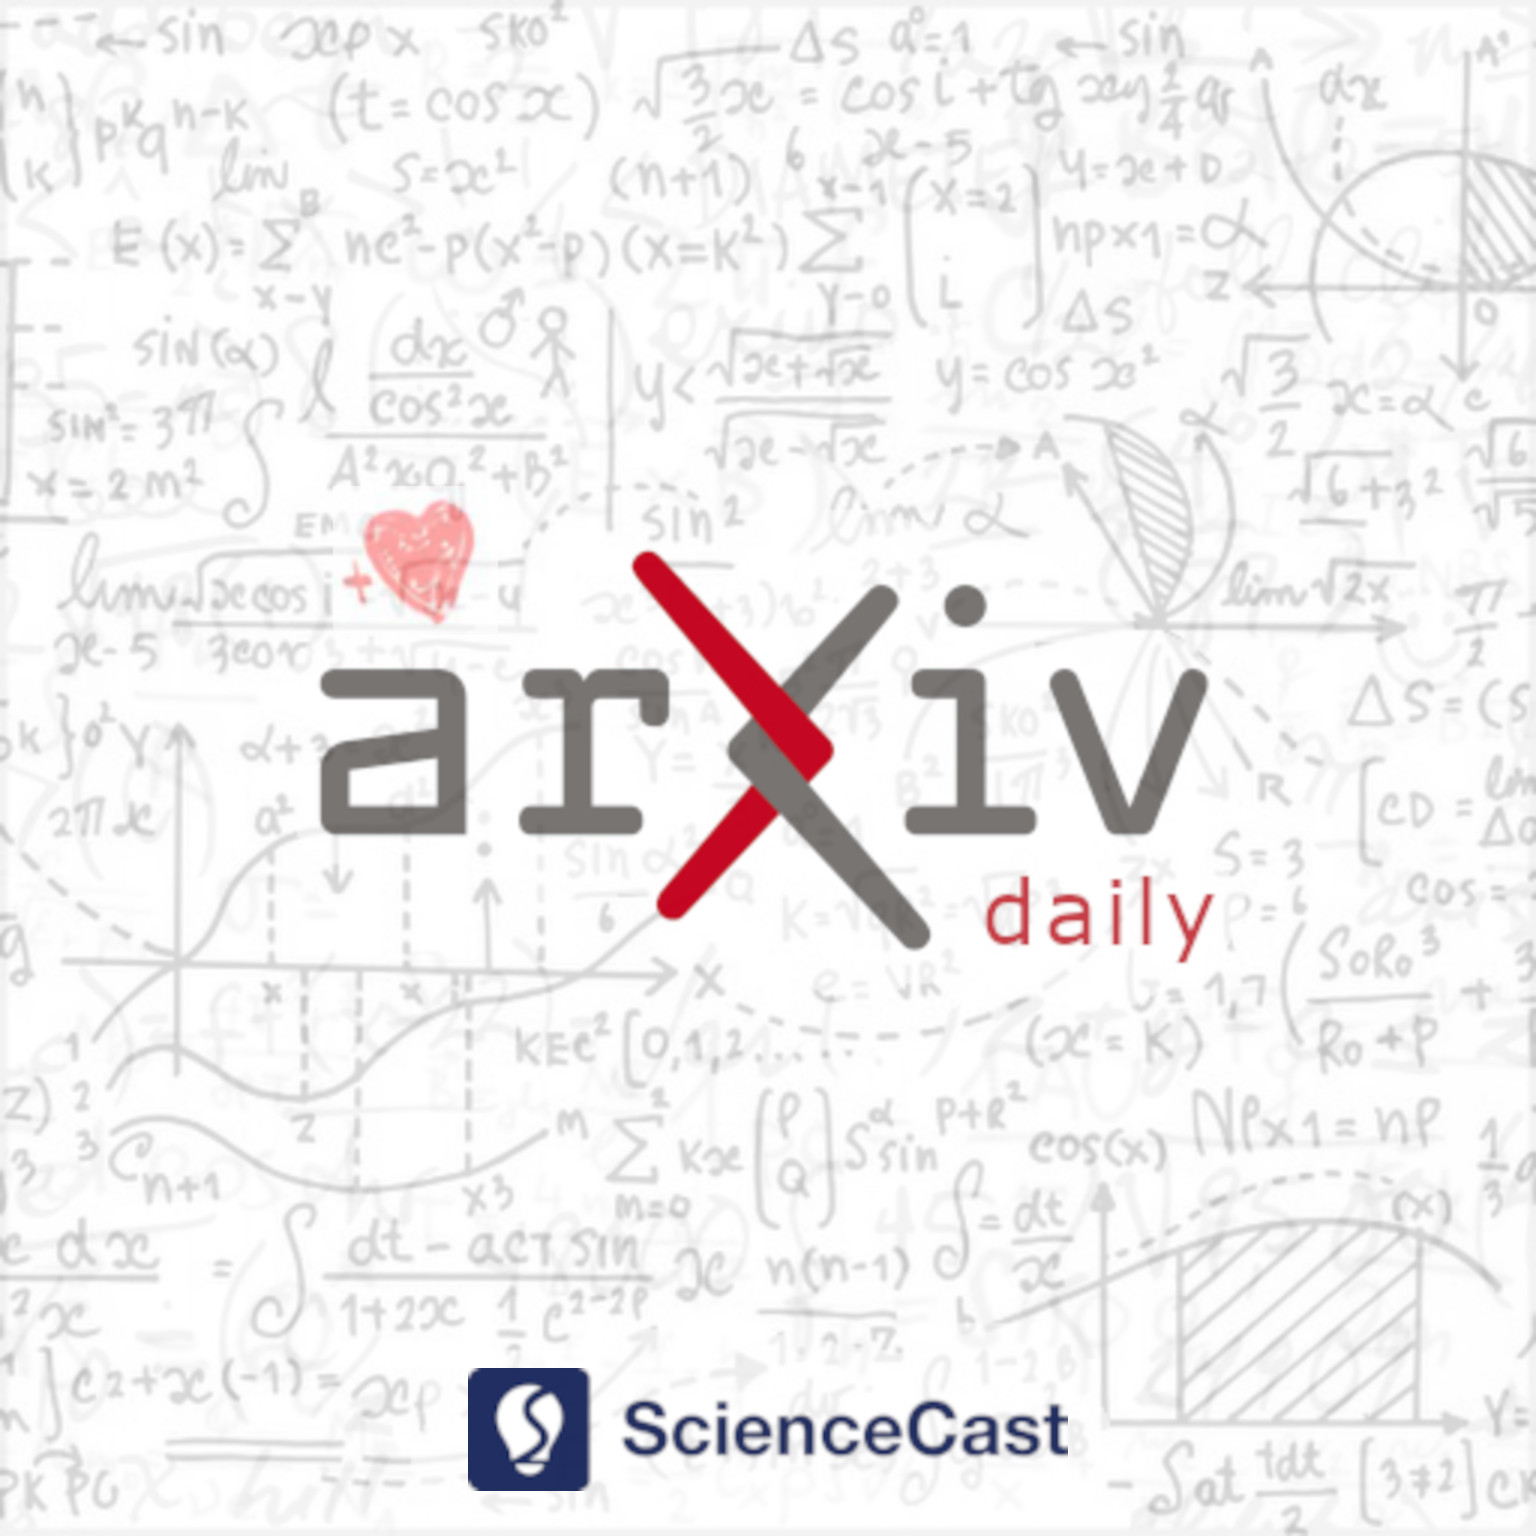 arXiv daily: Neurons and Cognition